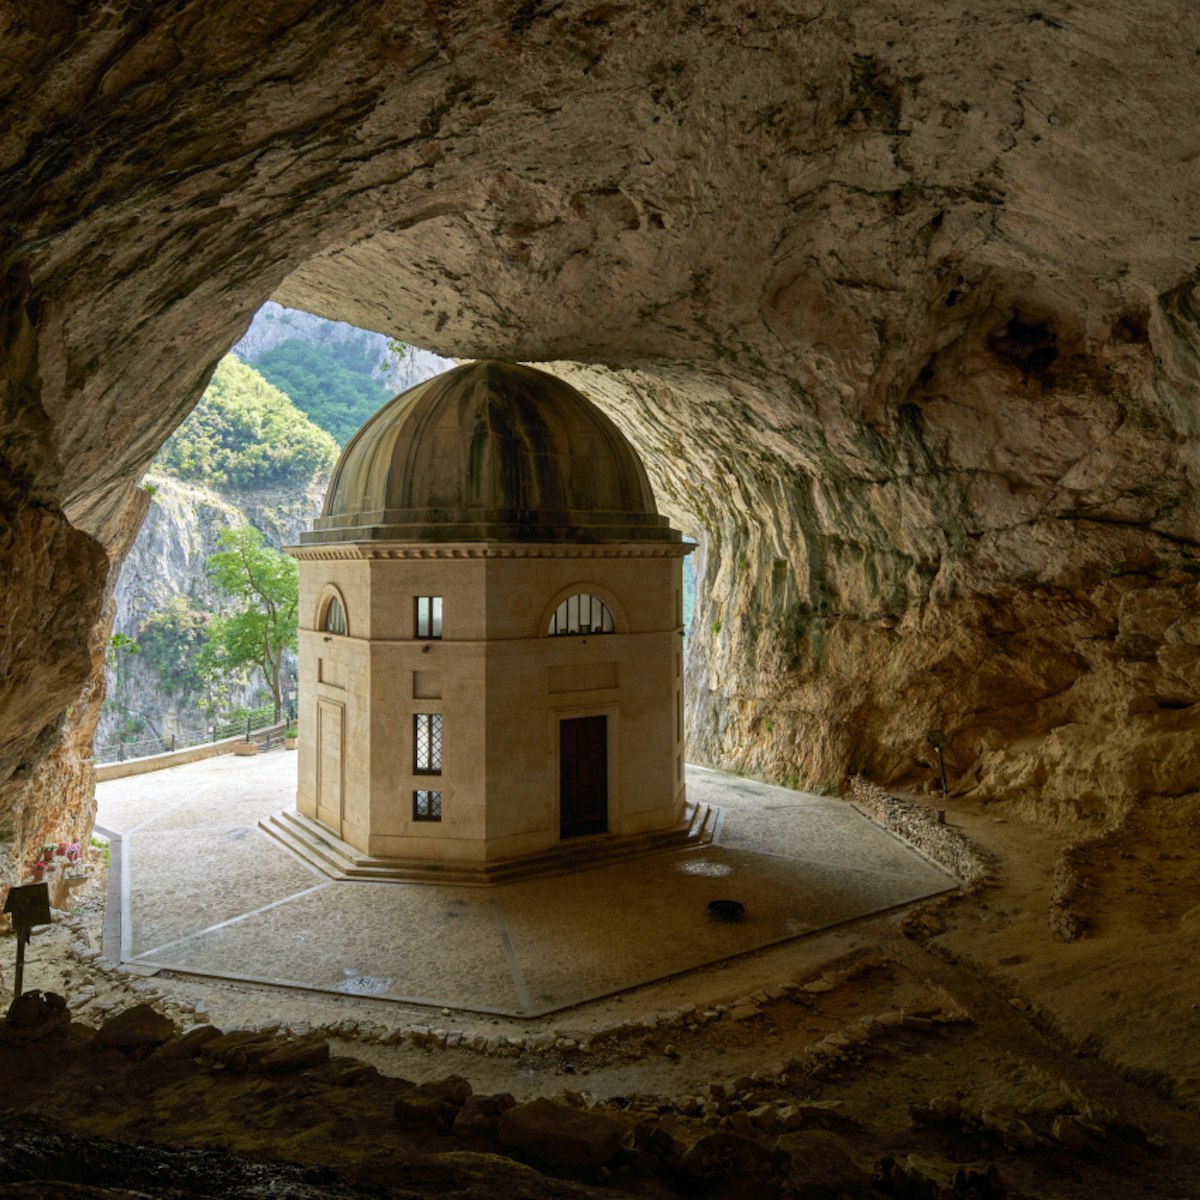 Tempio di Valadier built in 1828 inside a cave near caves of Frasassi.